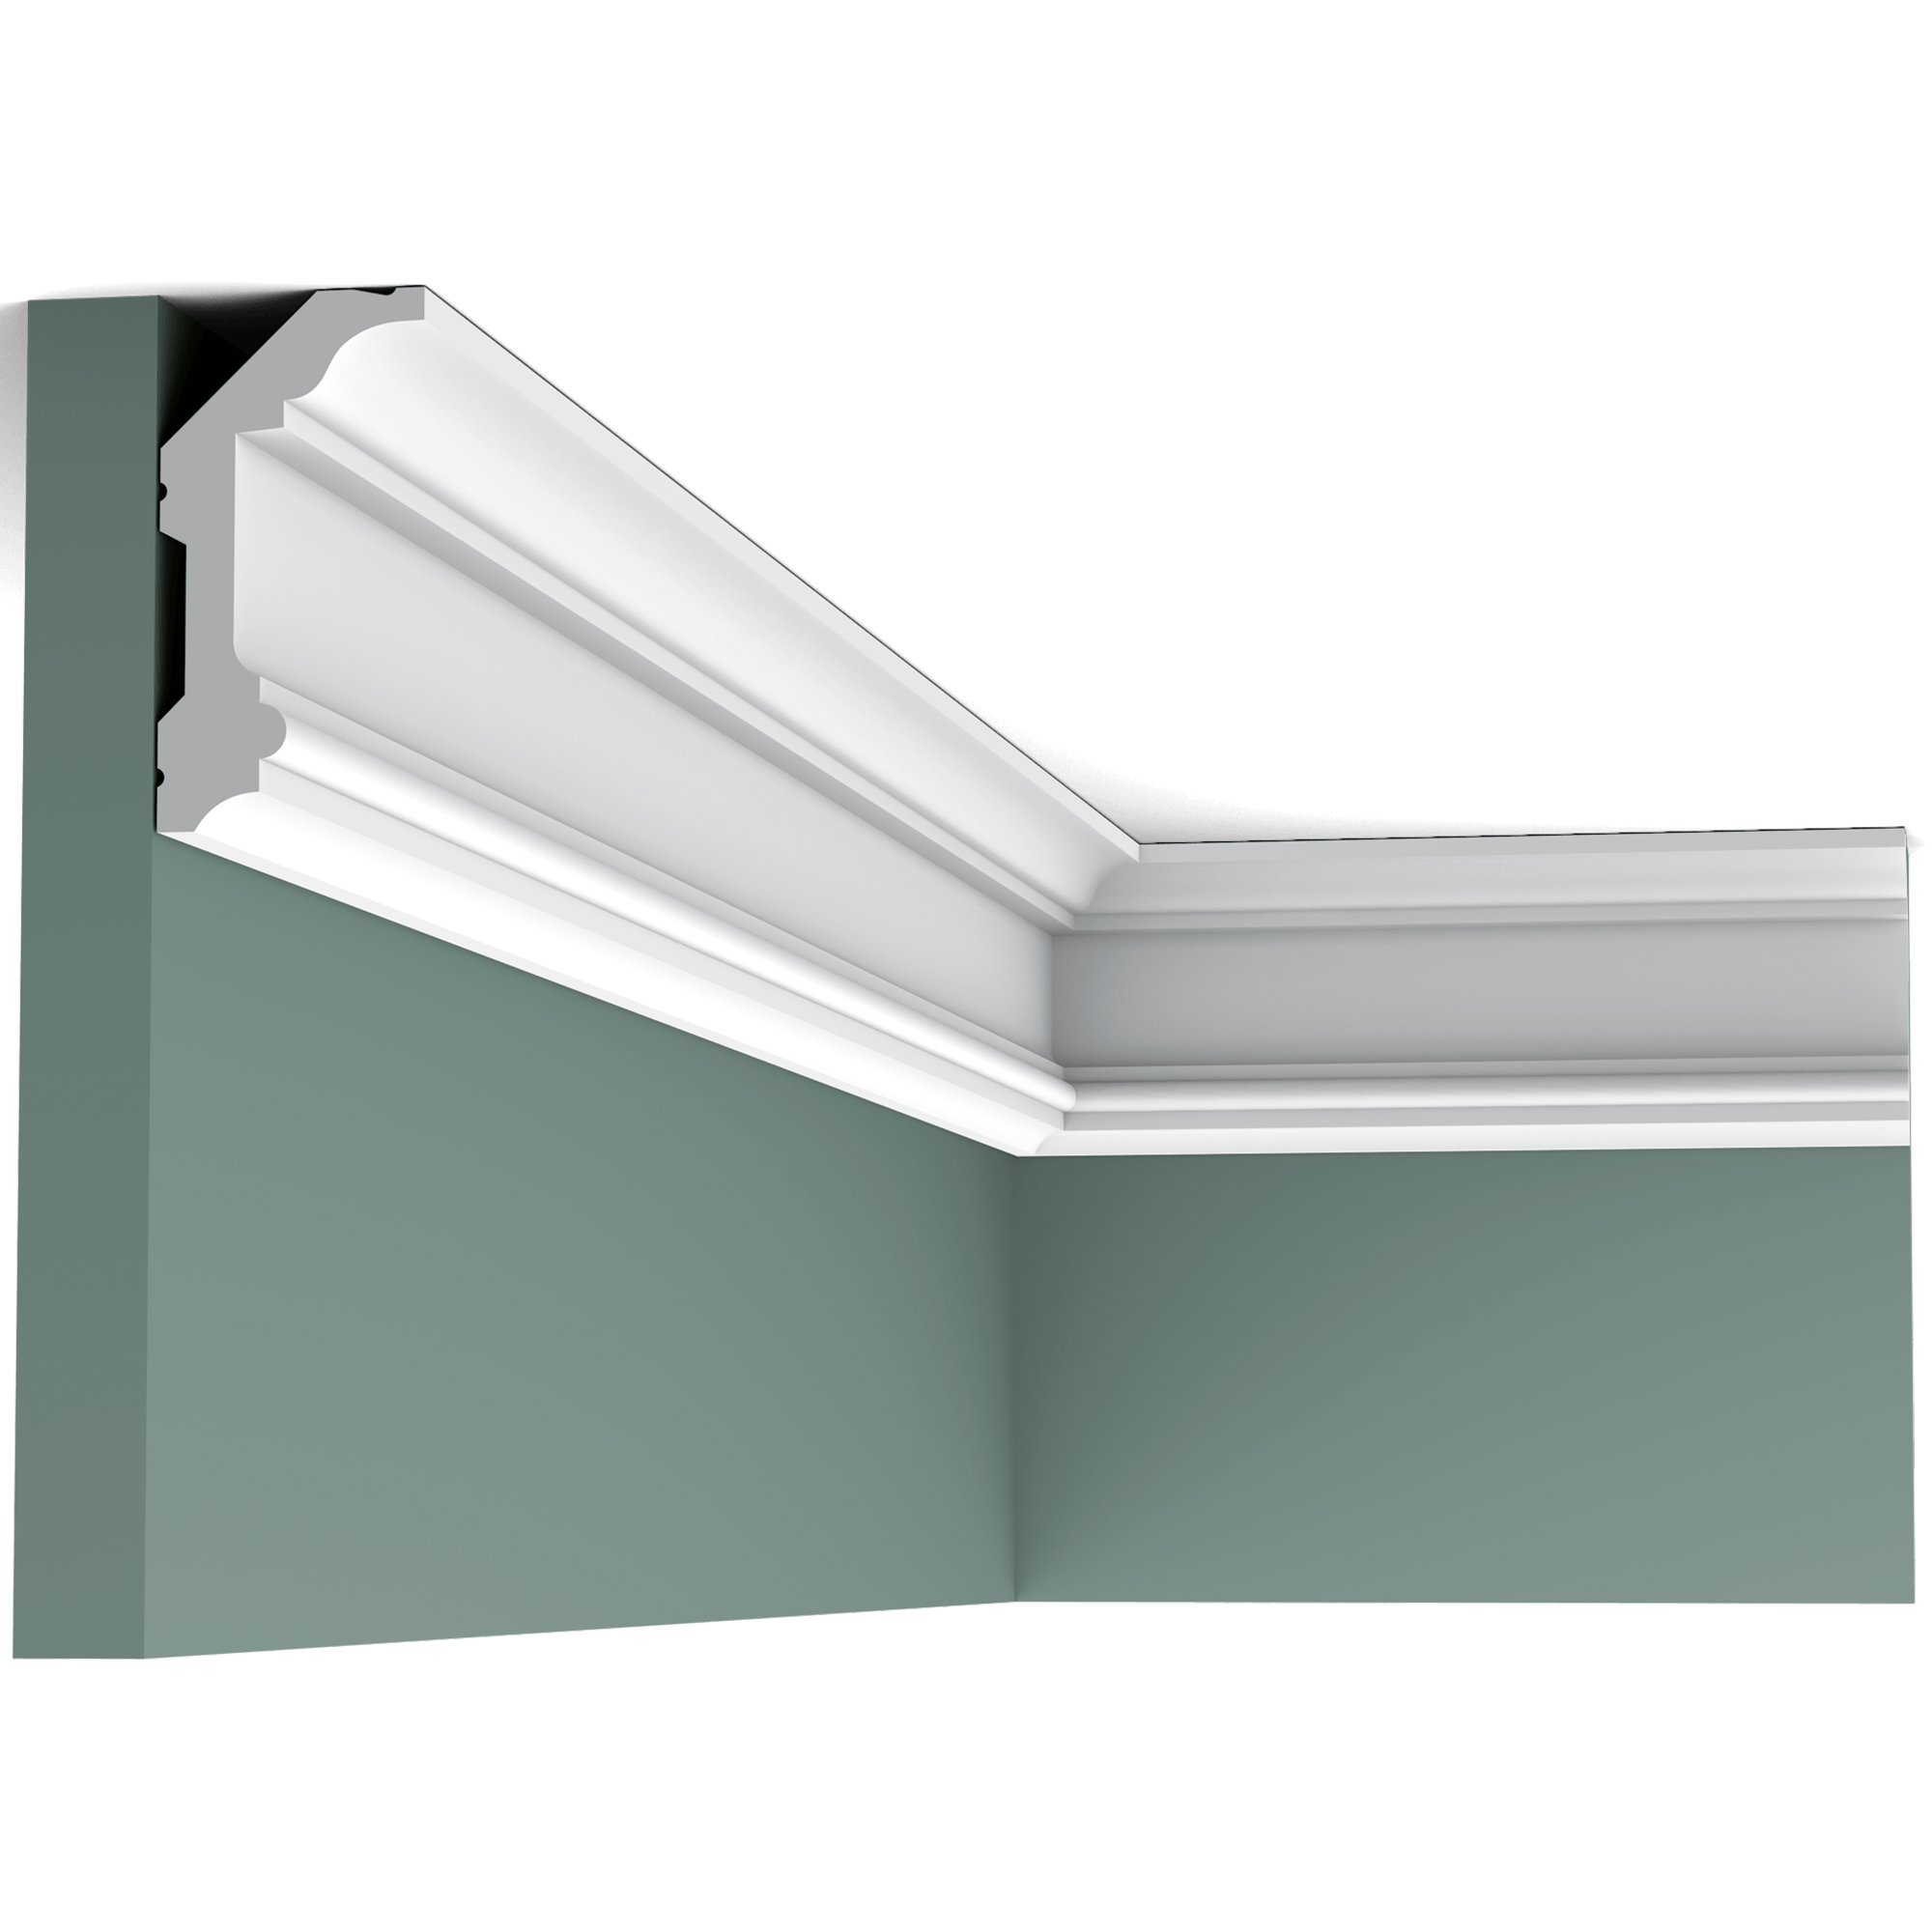 c321 cornice moulding 1731 Classic Cotswold model with linear design. This bestseller can be mounted in two ways, fixing the flat section to either the wall or the ceiling.